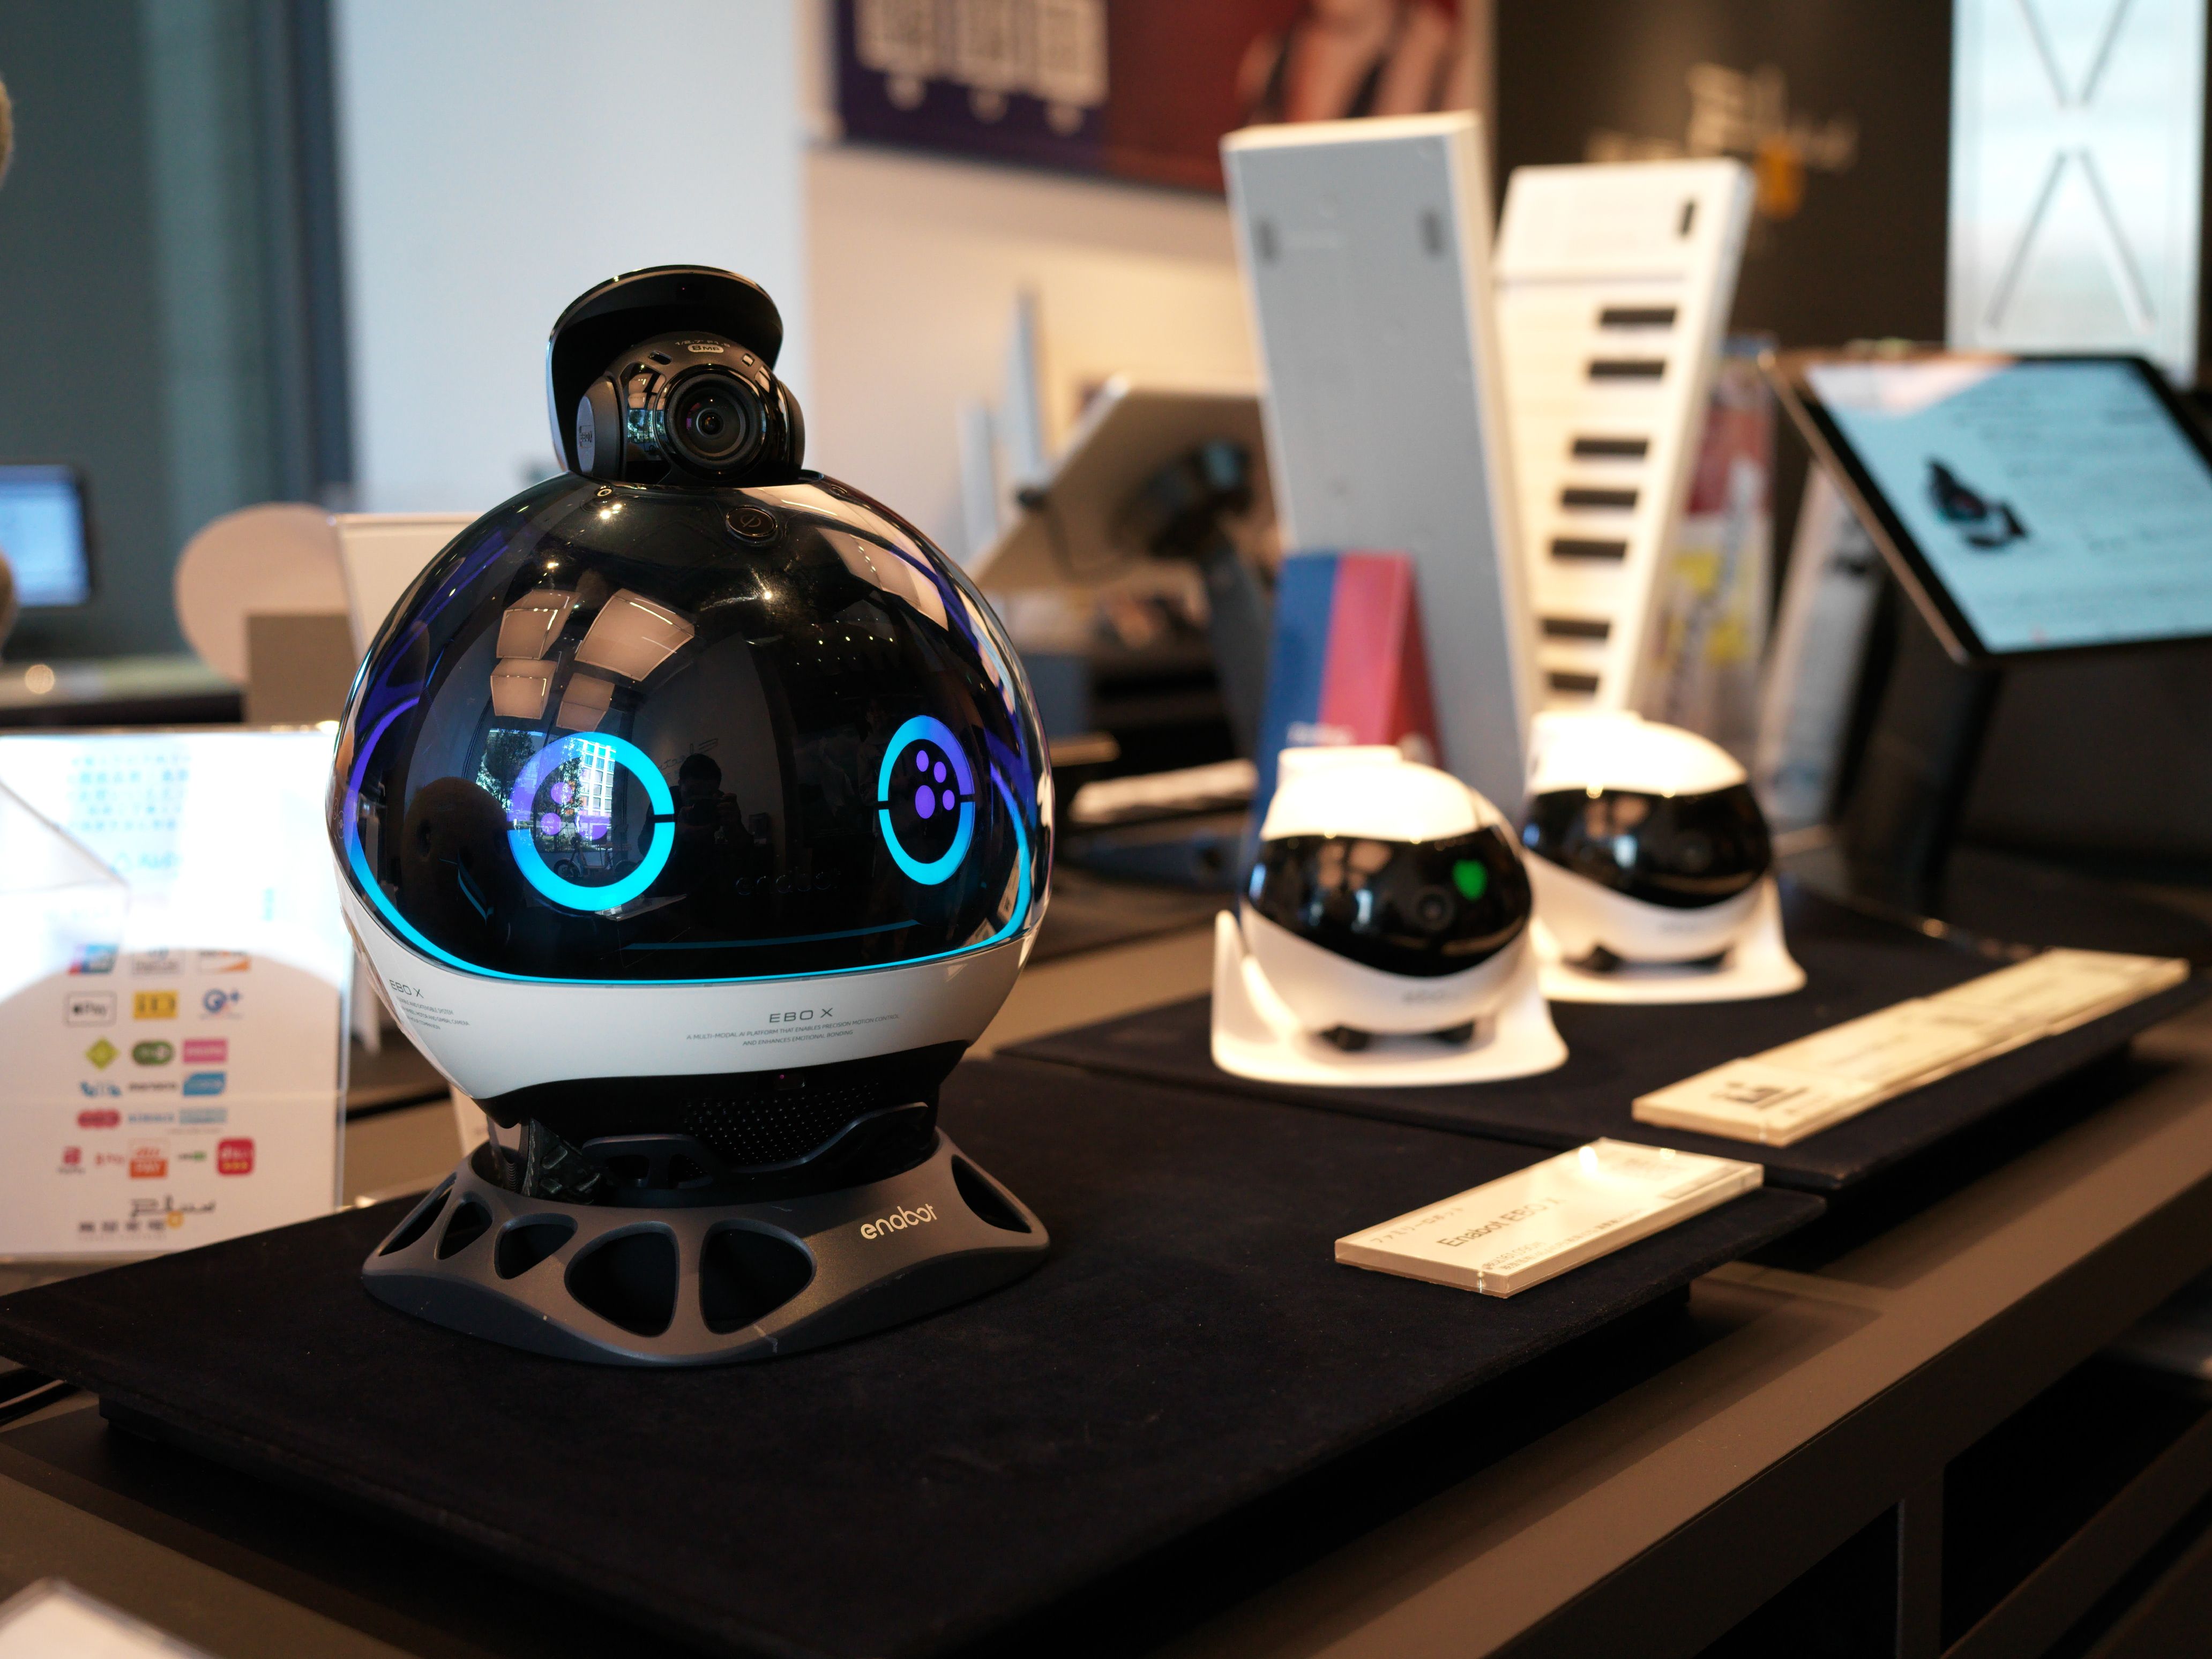 Enabot EBO X Family Companion Robot Comes Equipped with V-SLAM Navigation  and Color Night Vision - TechEBlog